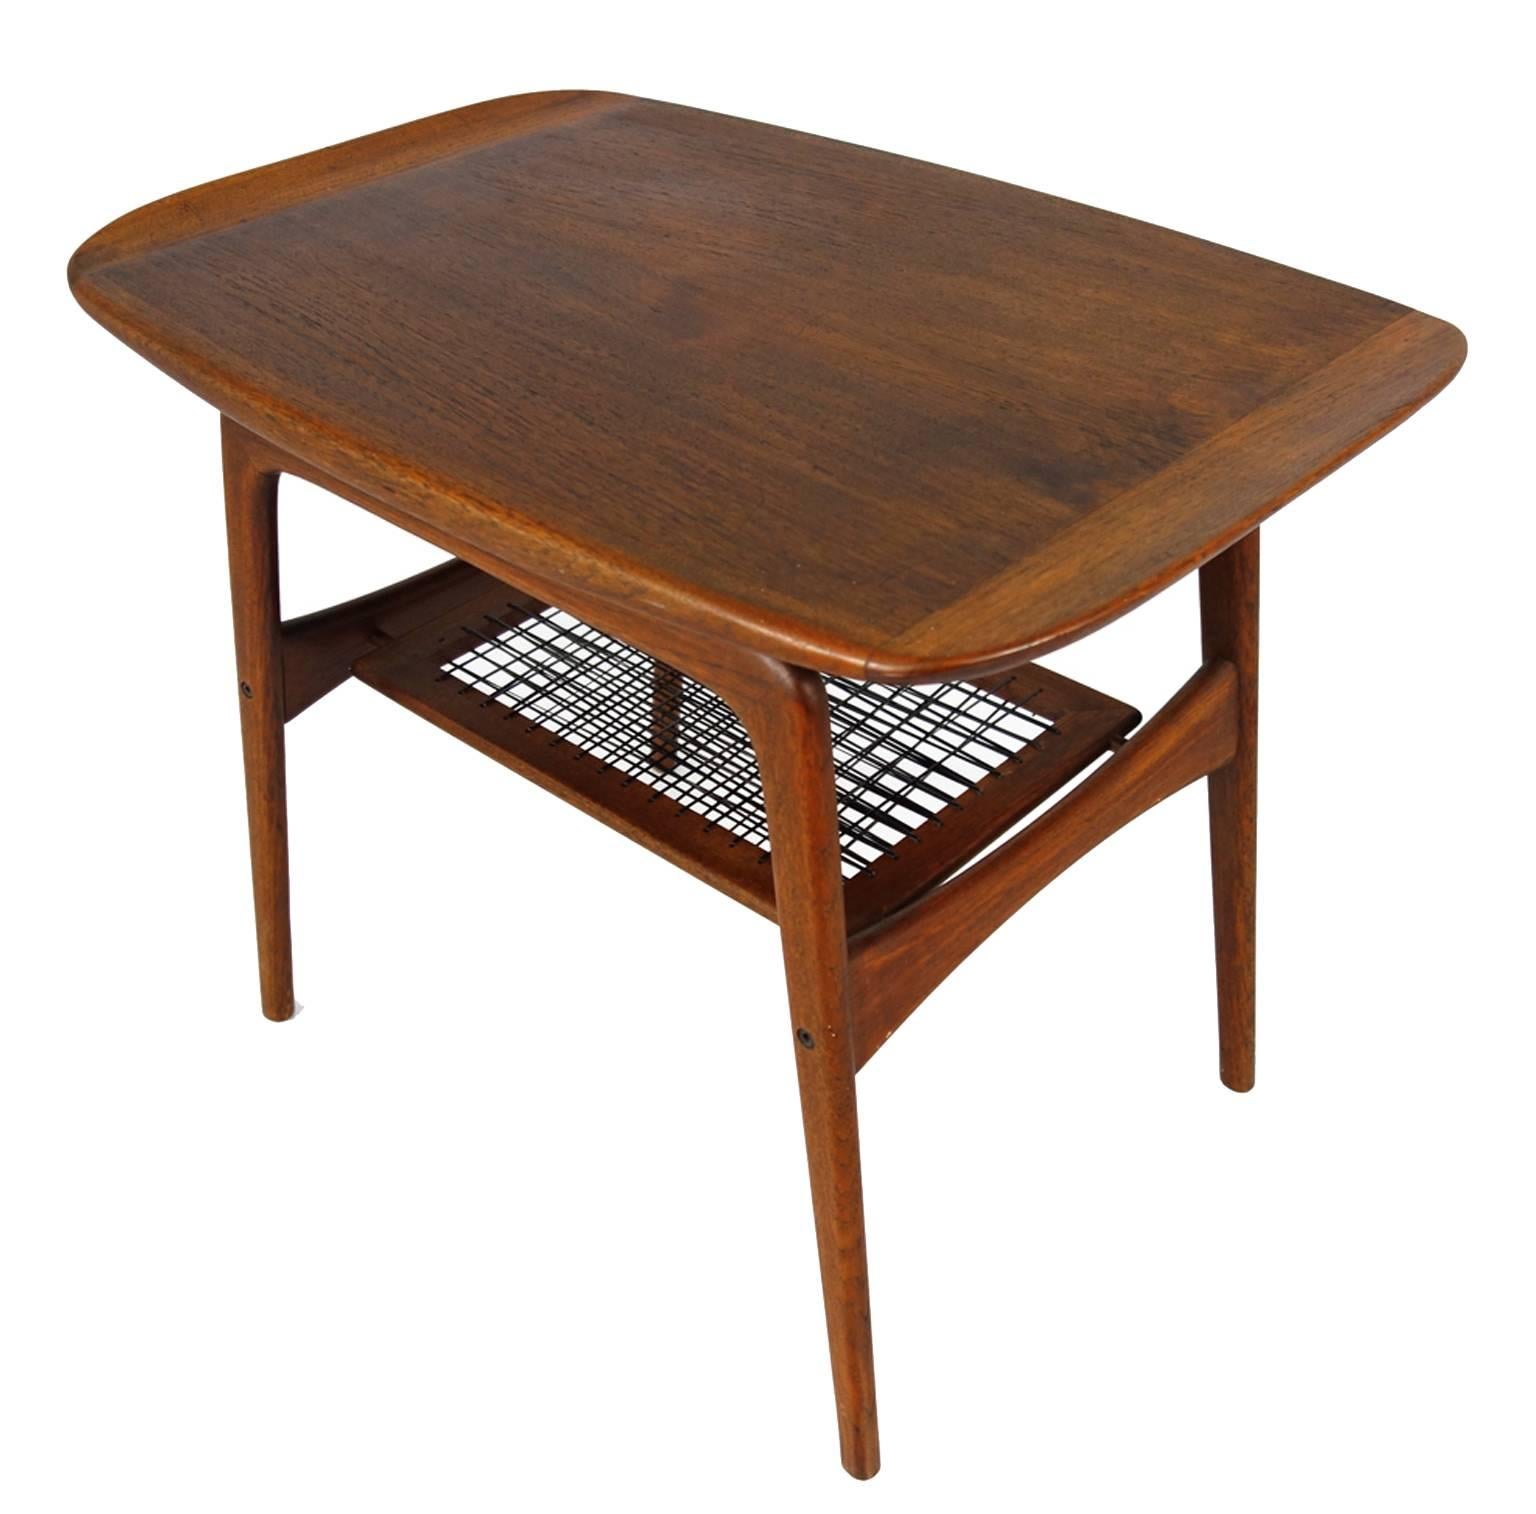 Mid-20th Century Two-Tiered Side Table by Arne Hovmand Olsen